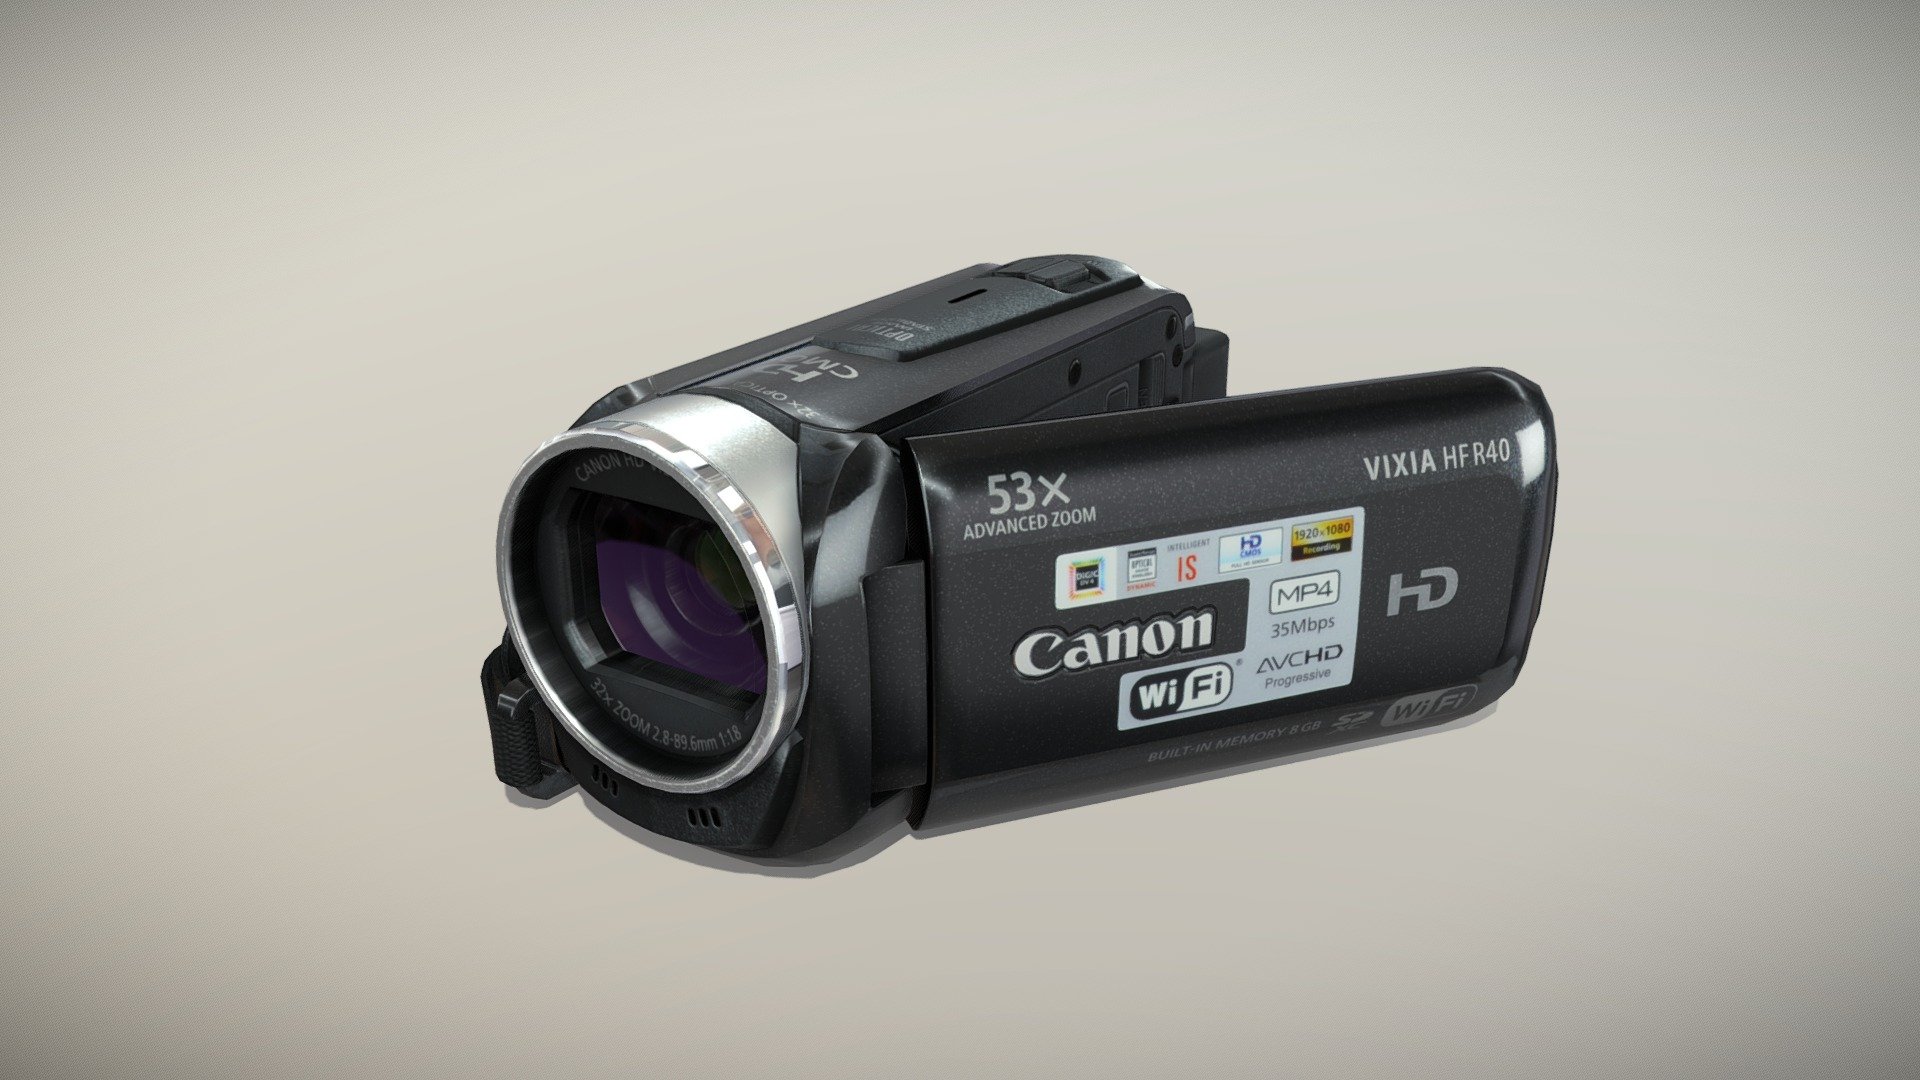 •   Let me present to you high-quality low-poly 3D model Canon Vixia HF R40 Black. Modeling was made with ortho-photos of real camcorder that is why all details of design are recreated most authentically.

•    Ease of use consists of a few meshes, it is low-polygonal and it has three materials (Body, Strap and Glass Lens).

•   The total of the main textures is 7. Resolution of all textures is 4096 pixels square aspect ratio in .png format. Also there is original texture file .PSD format in separate archive.

•   Polygon count of the model is – 7325.

•   The model has correct dimensions in real-world scale. All parts grouped and named correctly.

•   To use the model in other 3D programs there are scenes saved in formats .fbx, .obj, .DAE, .max (2010 version).

Note: If you see some artifacts on the textures, it means compression works in the Viewer. We recommend setting HD quality for textures. But anyway, original textures have no artifacts 3d model